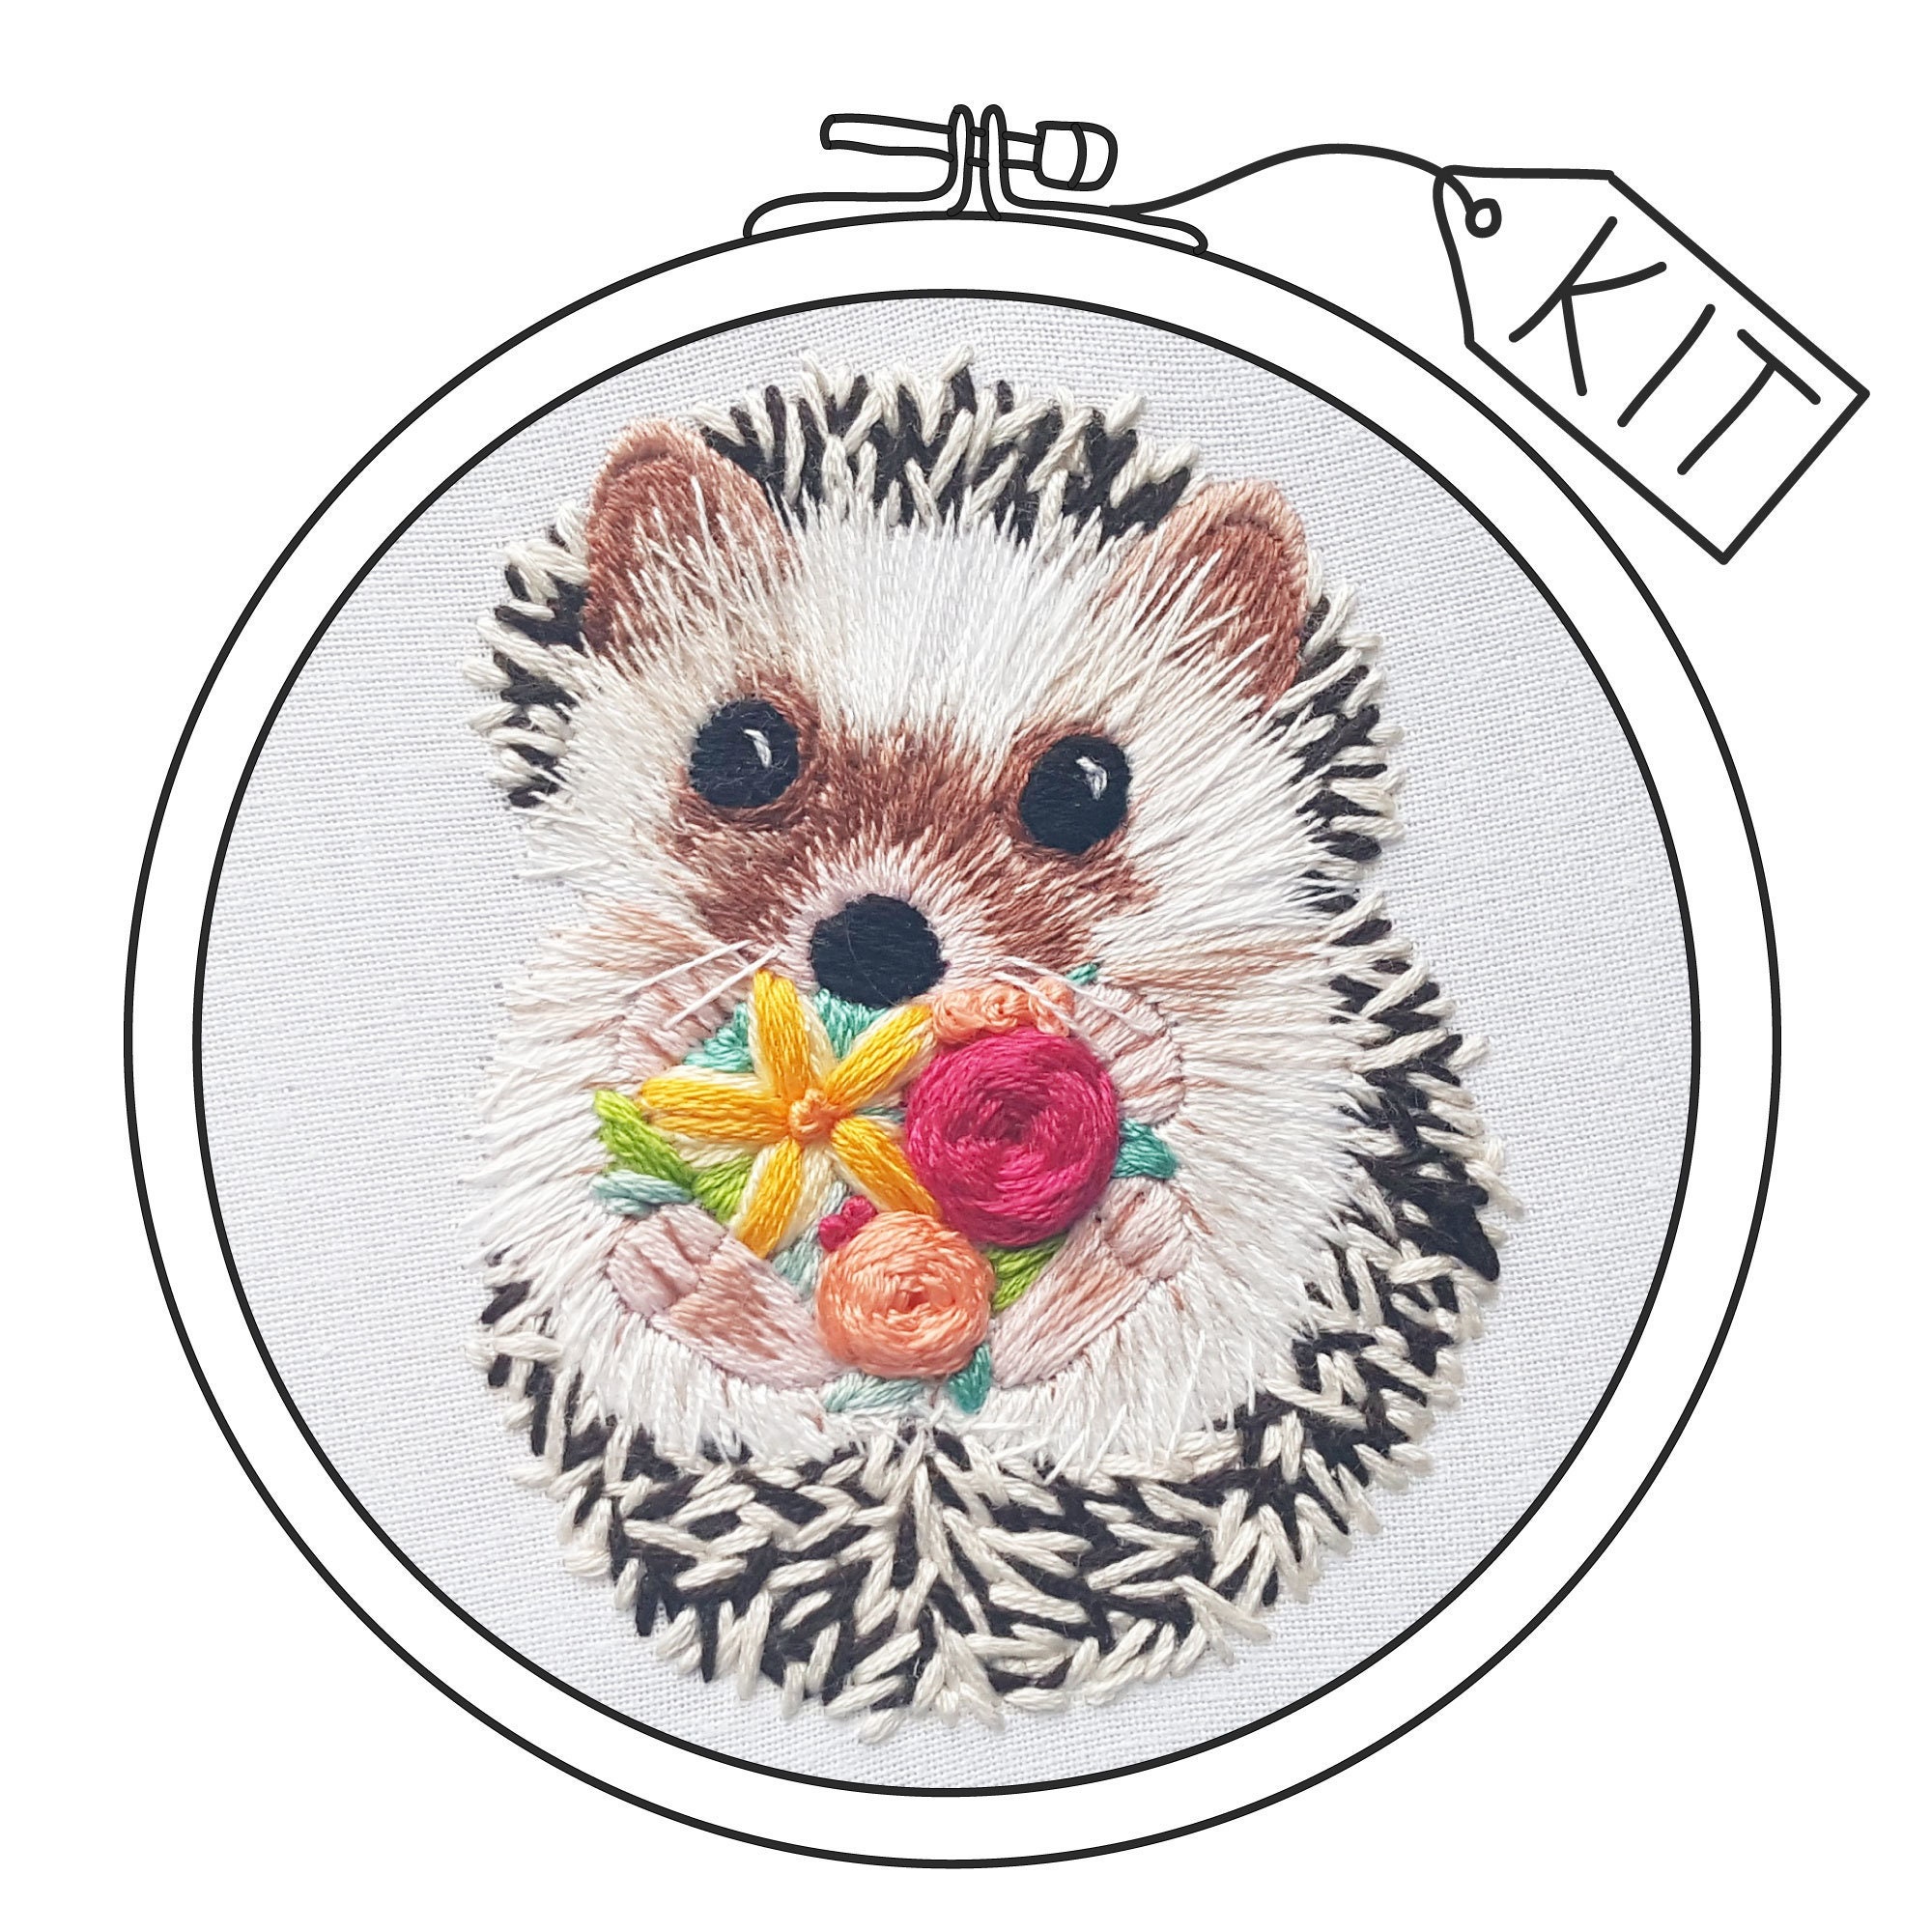 HOLLY christmas embroidery pattern — noodle & lou